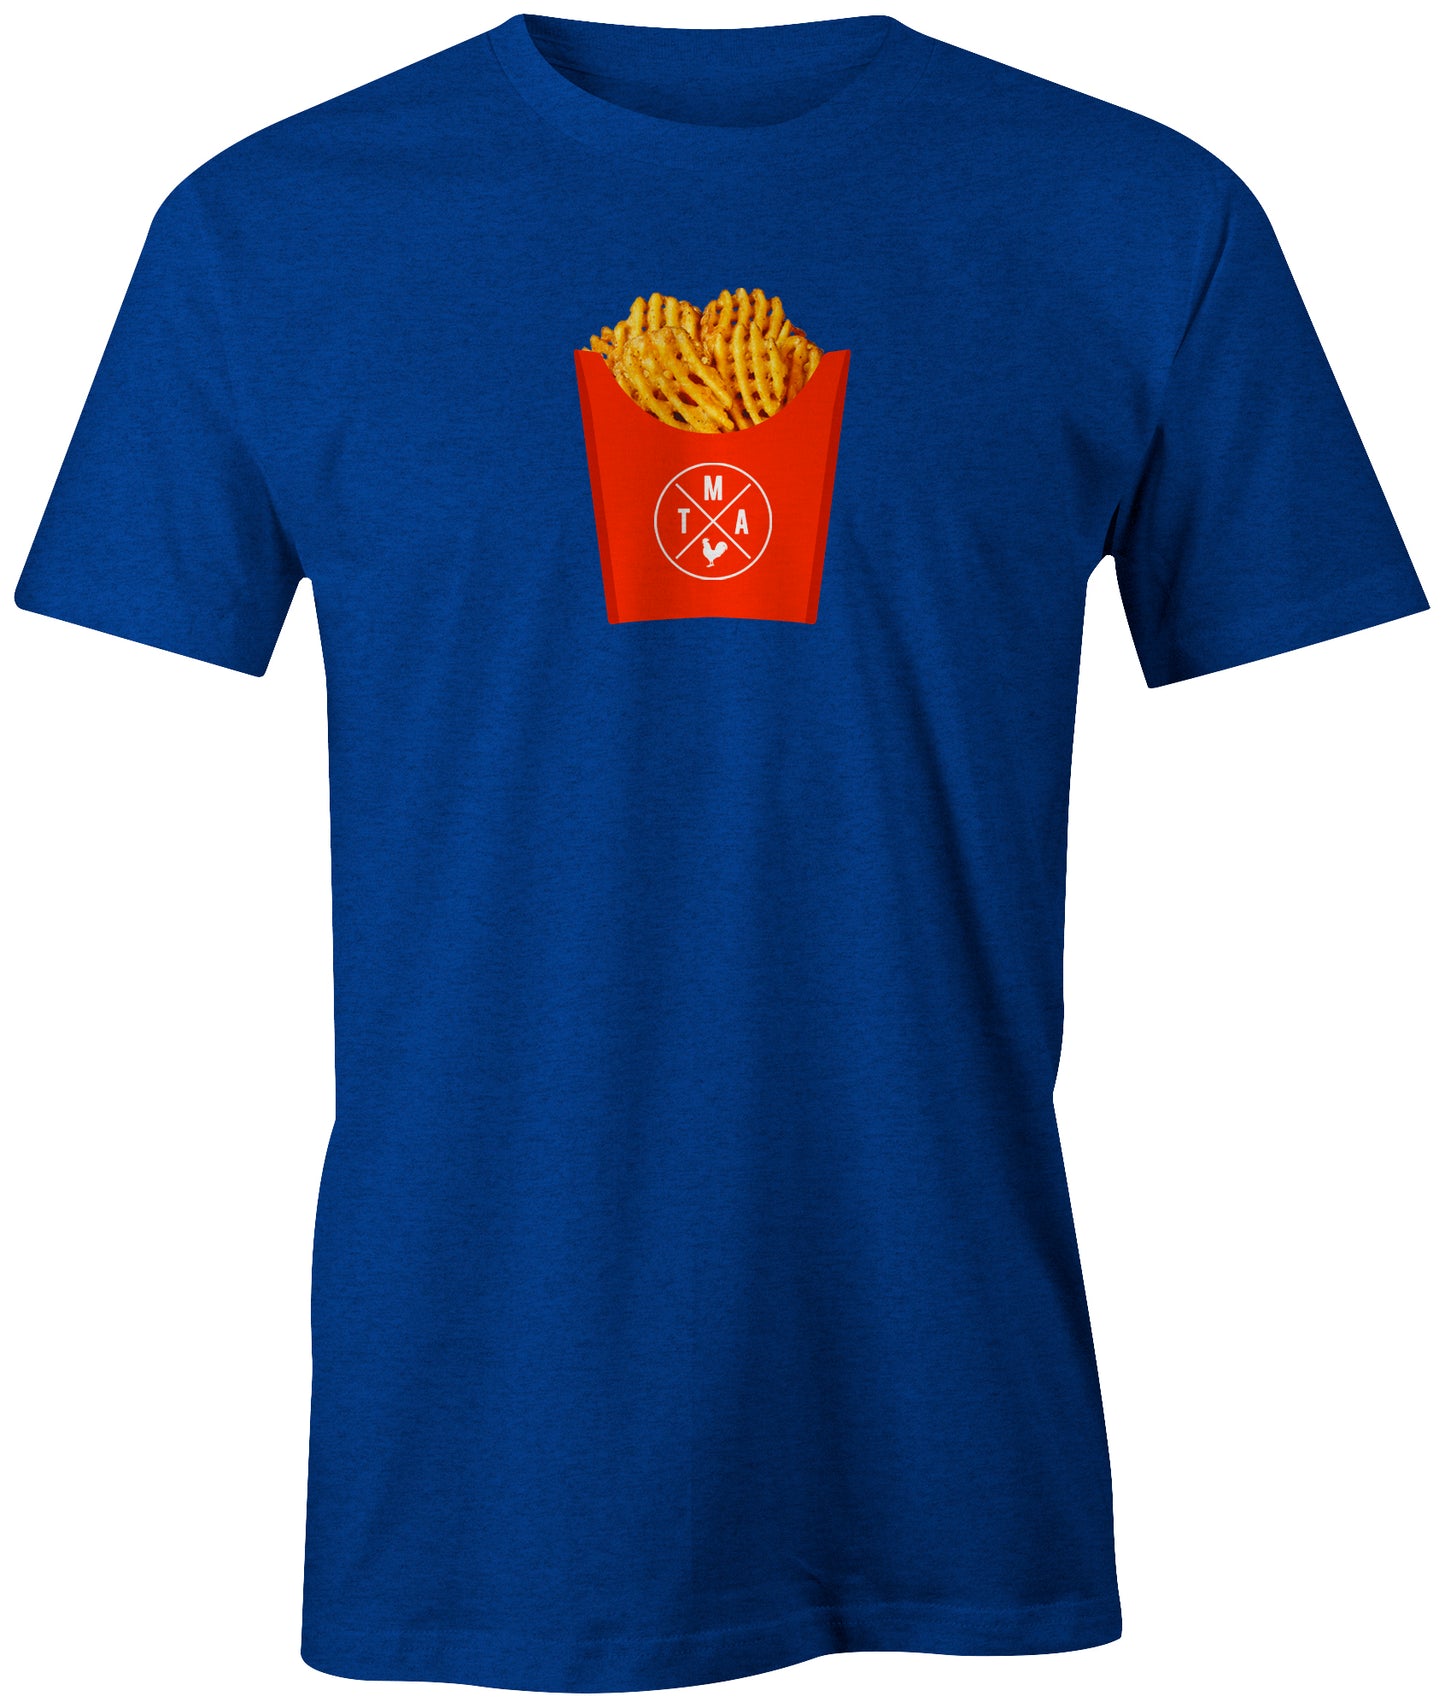 the morning after french fries tee tshirt st louis stl apparel clothing biff fries waffle